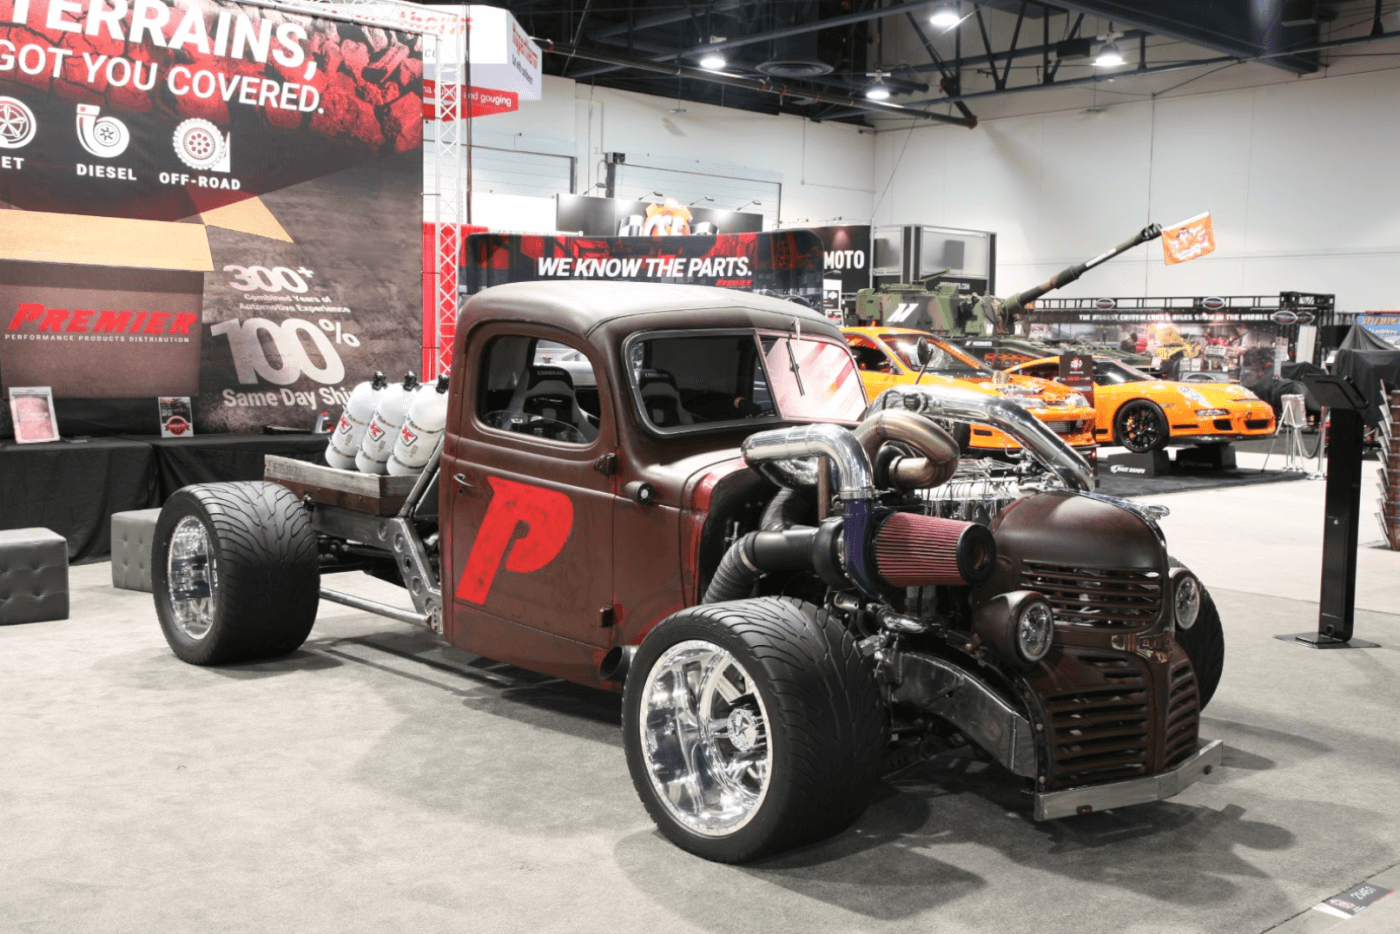 Premier Performance built this rat rod that were sure could eat just about any other rat rod on the track, and the dyno as well! Powered by a 6BT complete with a compound turbo setup and six—yes six—15 lb. nitrous bottles in the bed. Talk about overkill!